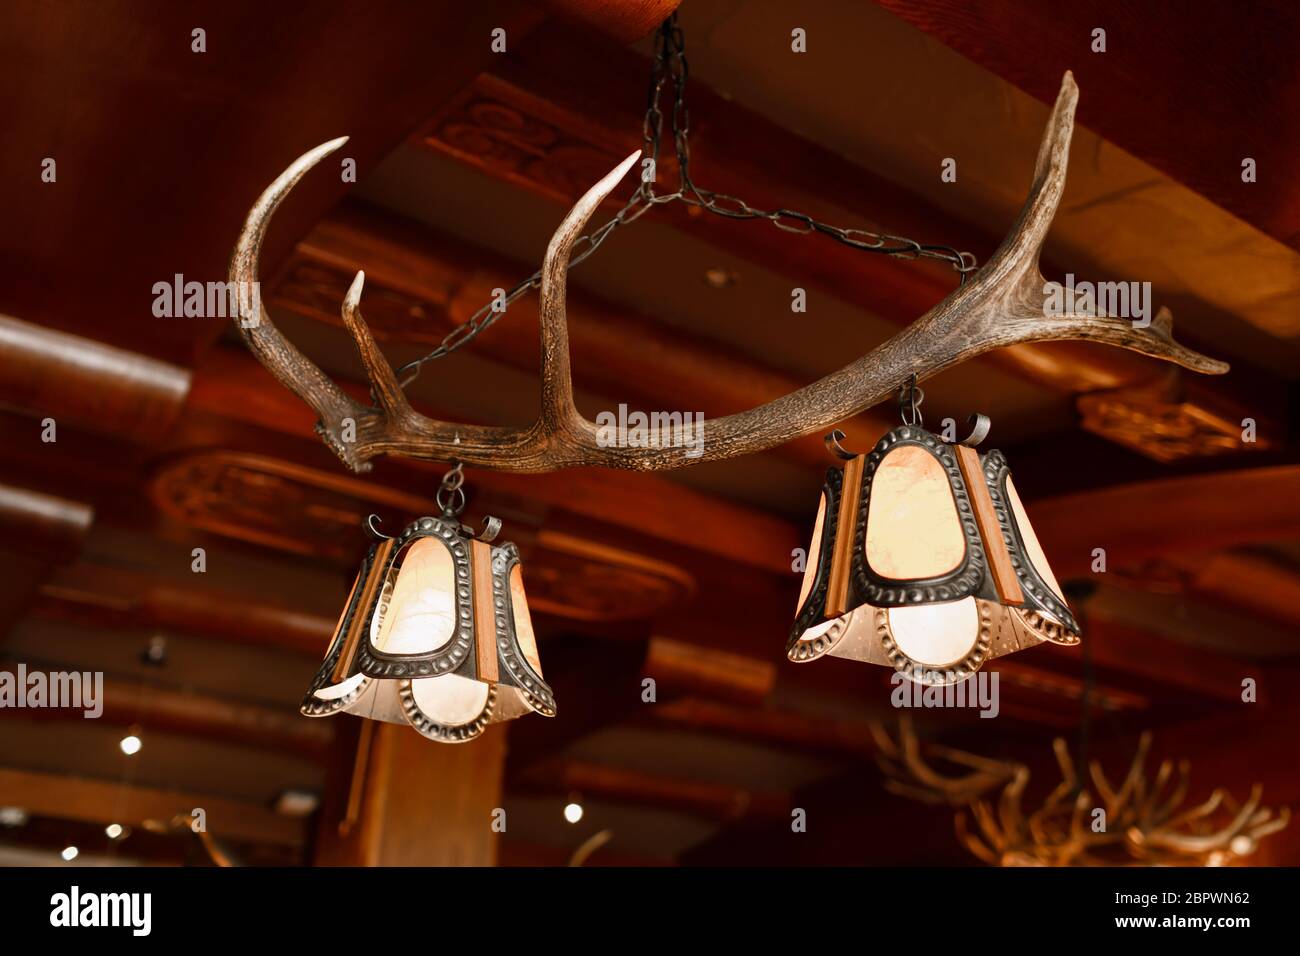 Antlers Hotel High Resolution Stock Photography and Images - Alamy